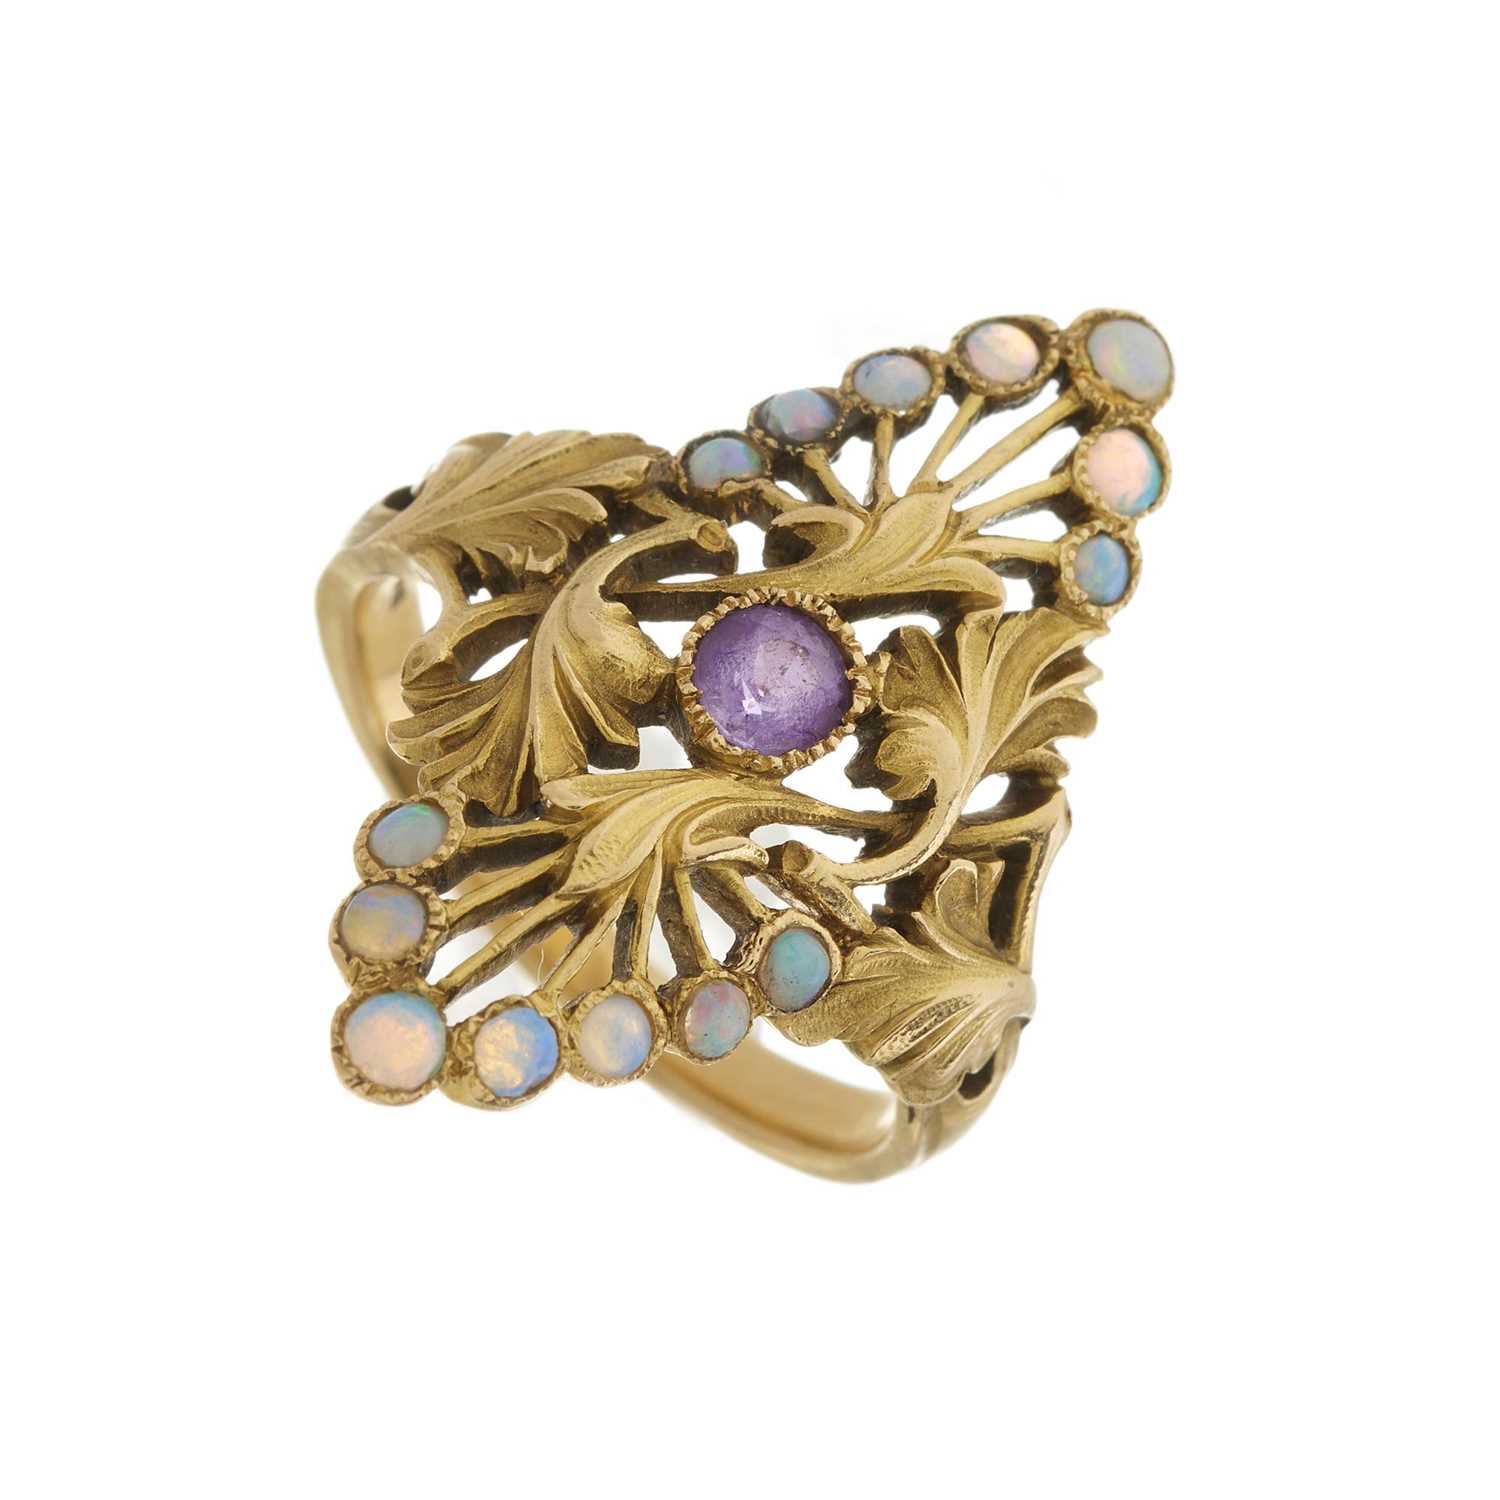 Antoine Bricteux (attributed), an Art Nouveau 18ct gold amethyst and opal dress ring - Image 3 of 3